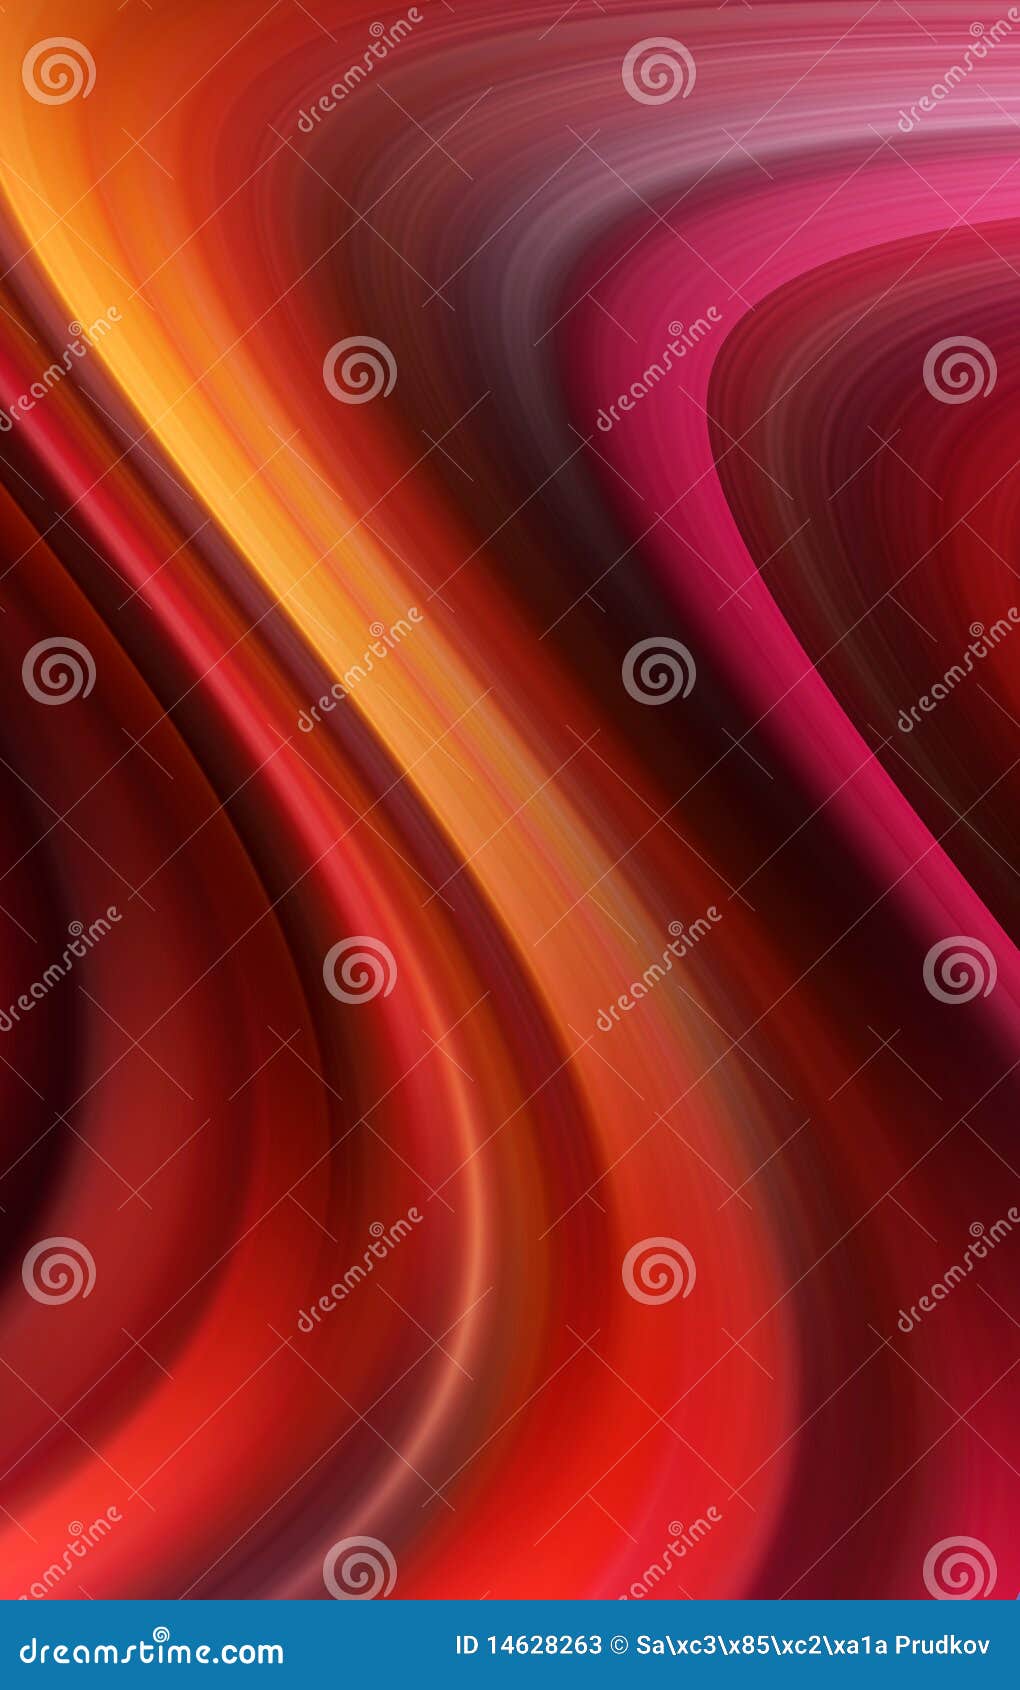 abstract wavy background in red and yellow tones